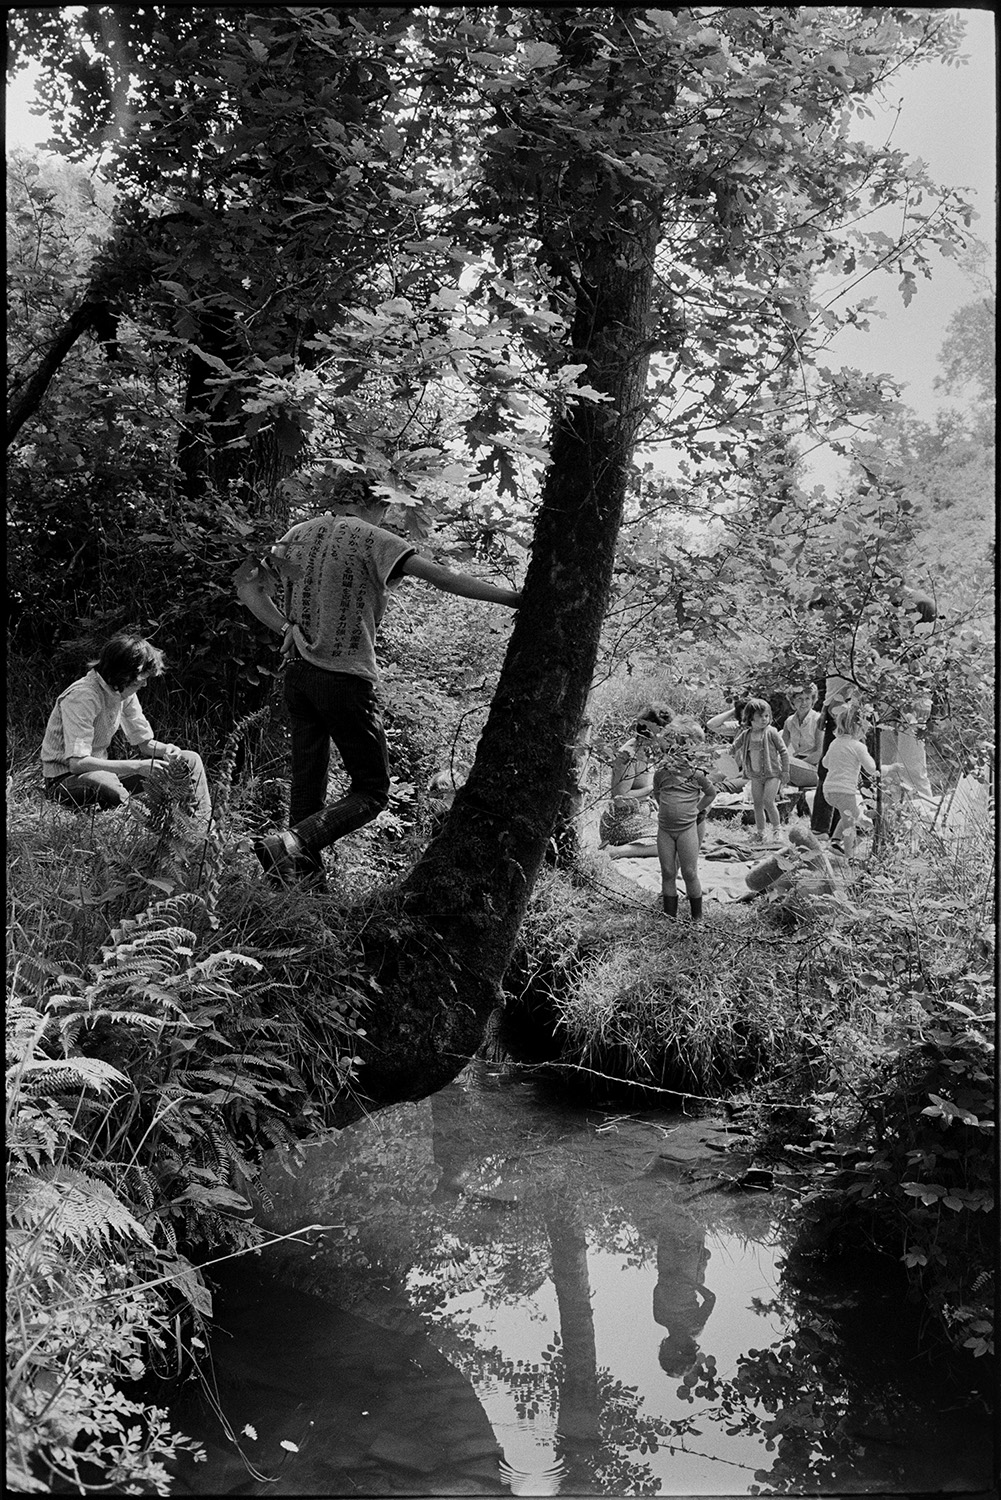 People picnicking in wood beside stream. 
[Women and children having a picnic in a small clearing by a stream in Dolton Wood. One of the children is leaning against a tree overhanging the stream.]